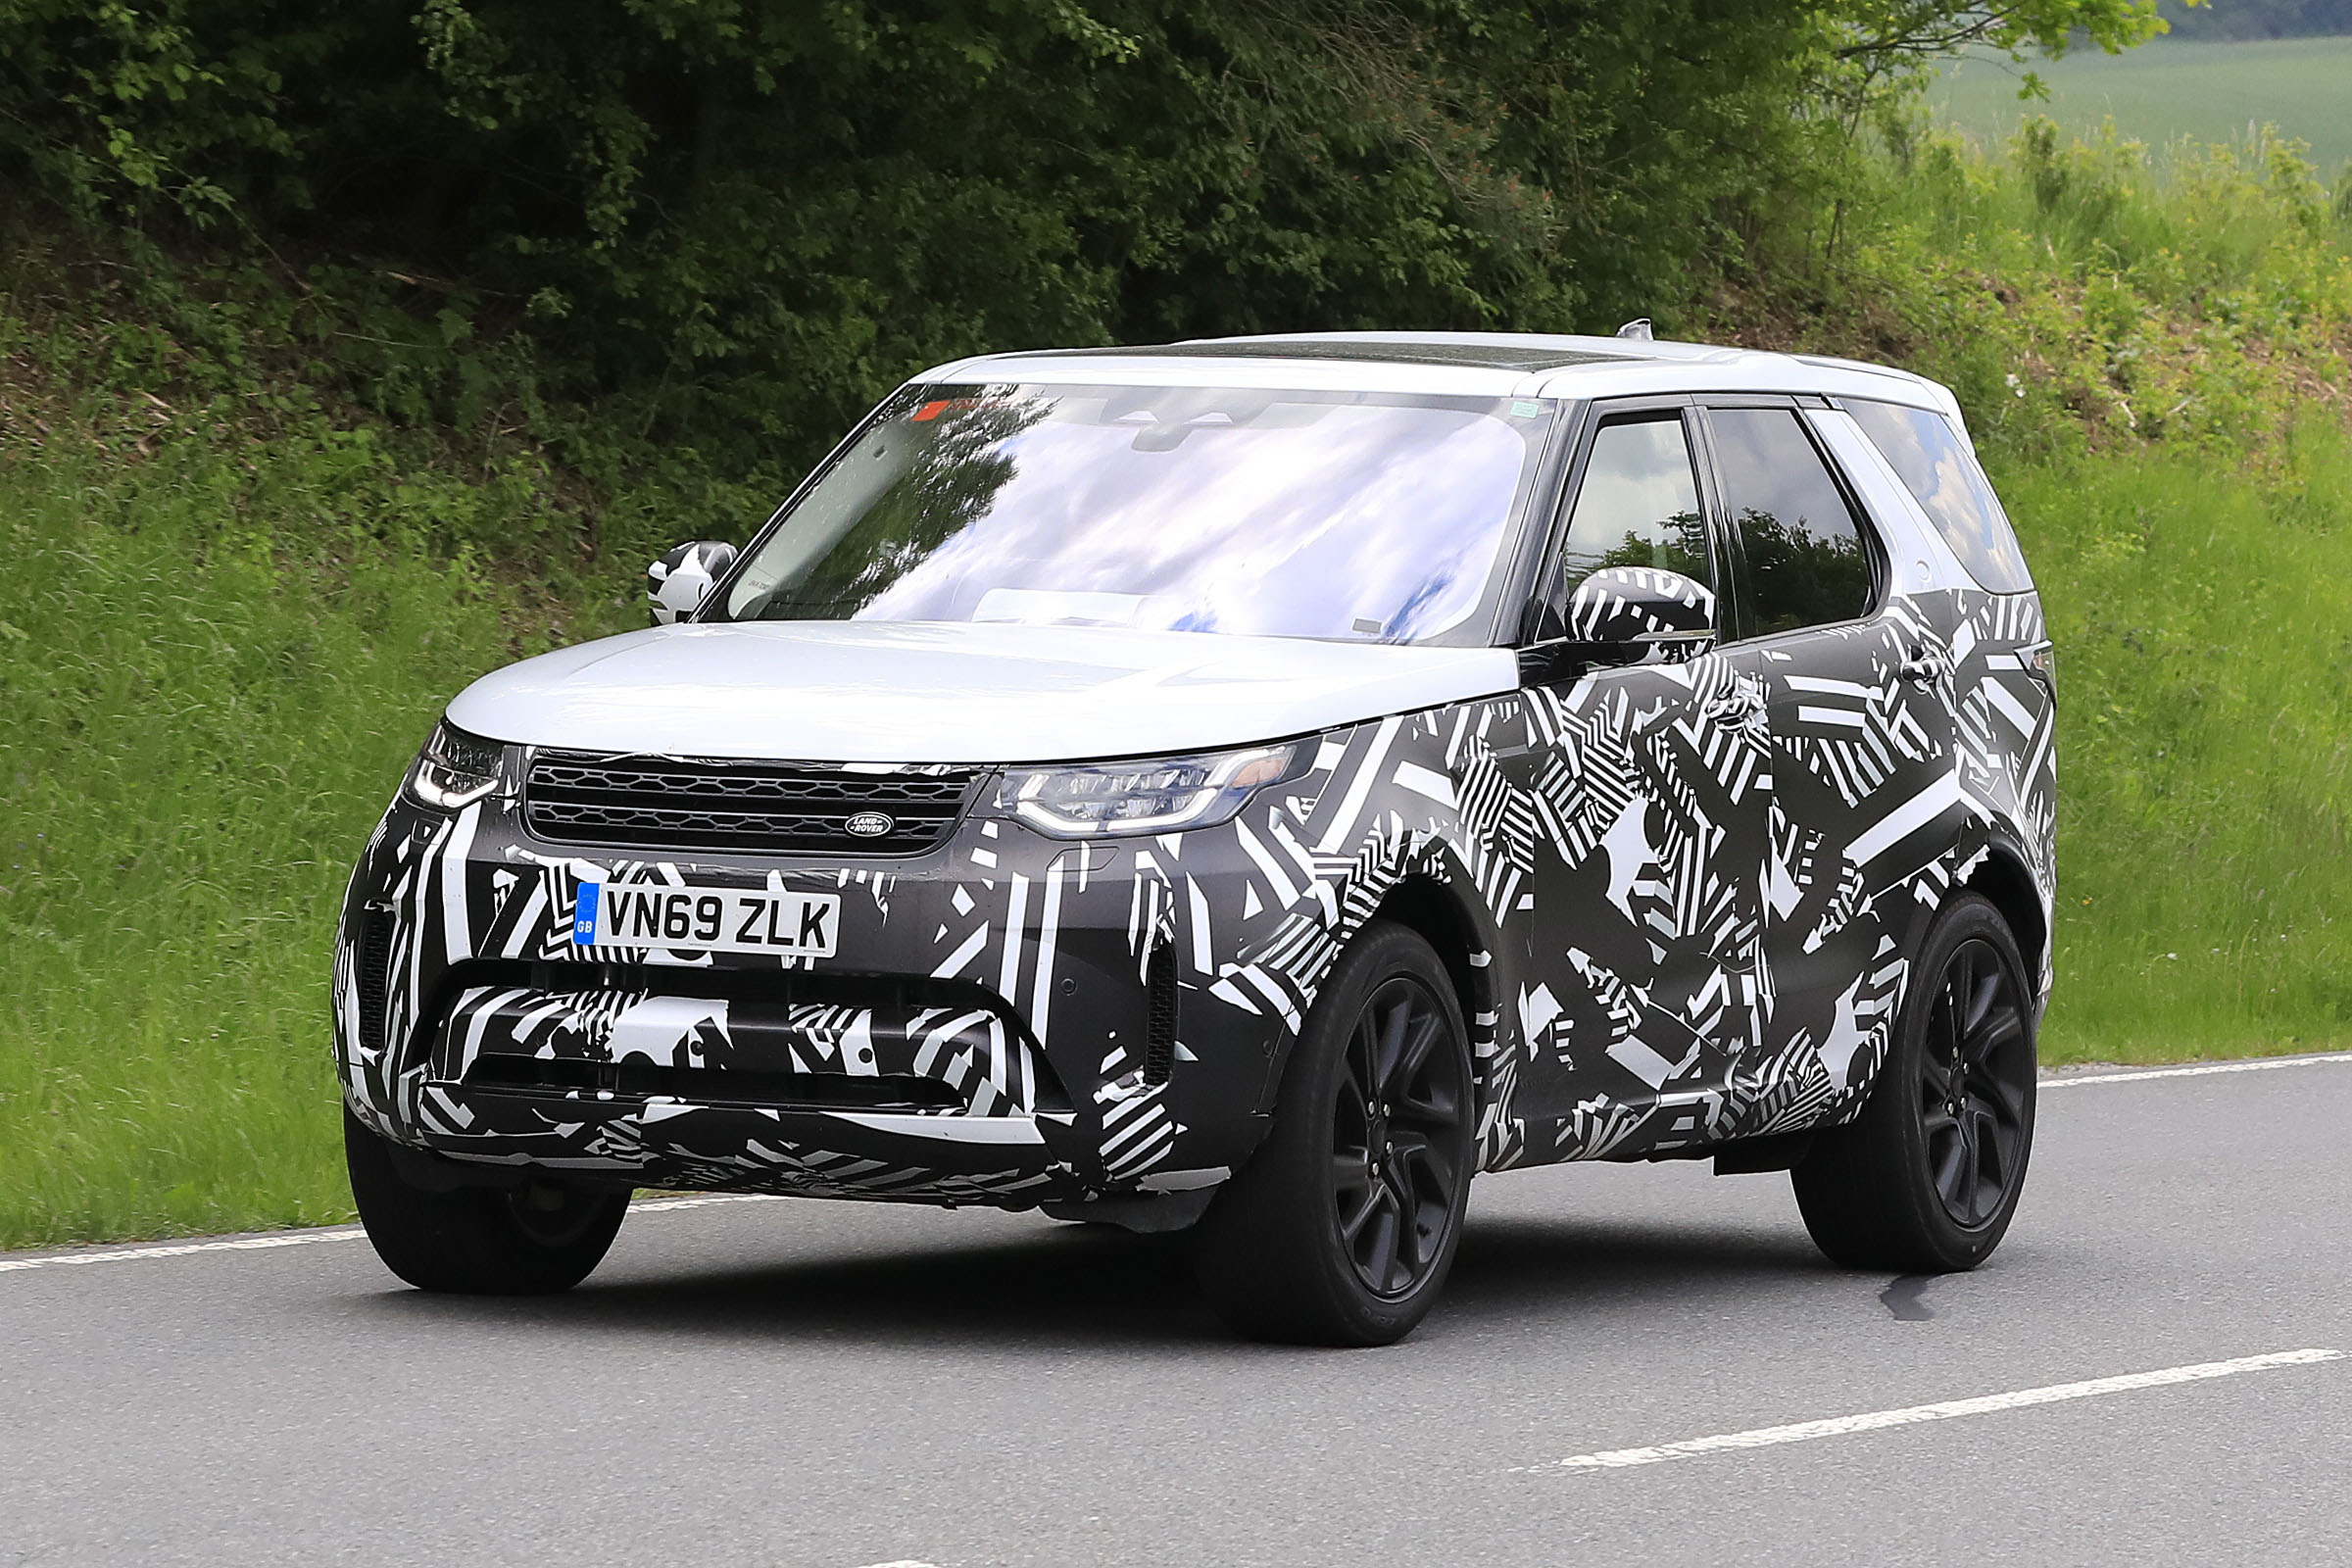 Land Rover Discovery hybrid facelifted model spotted